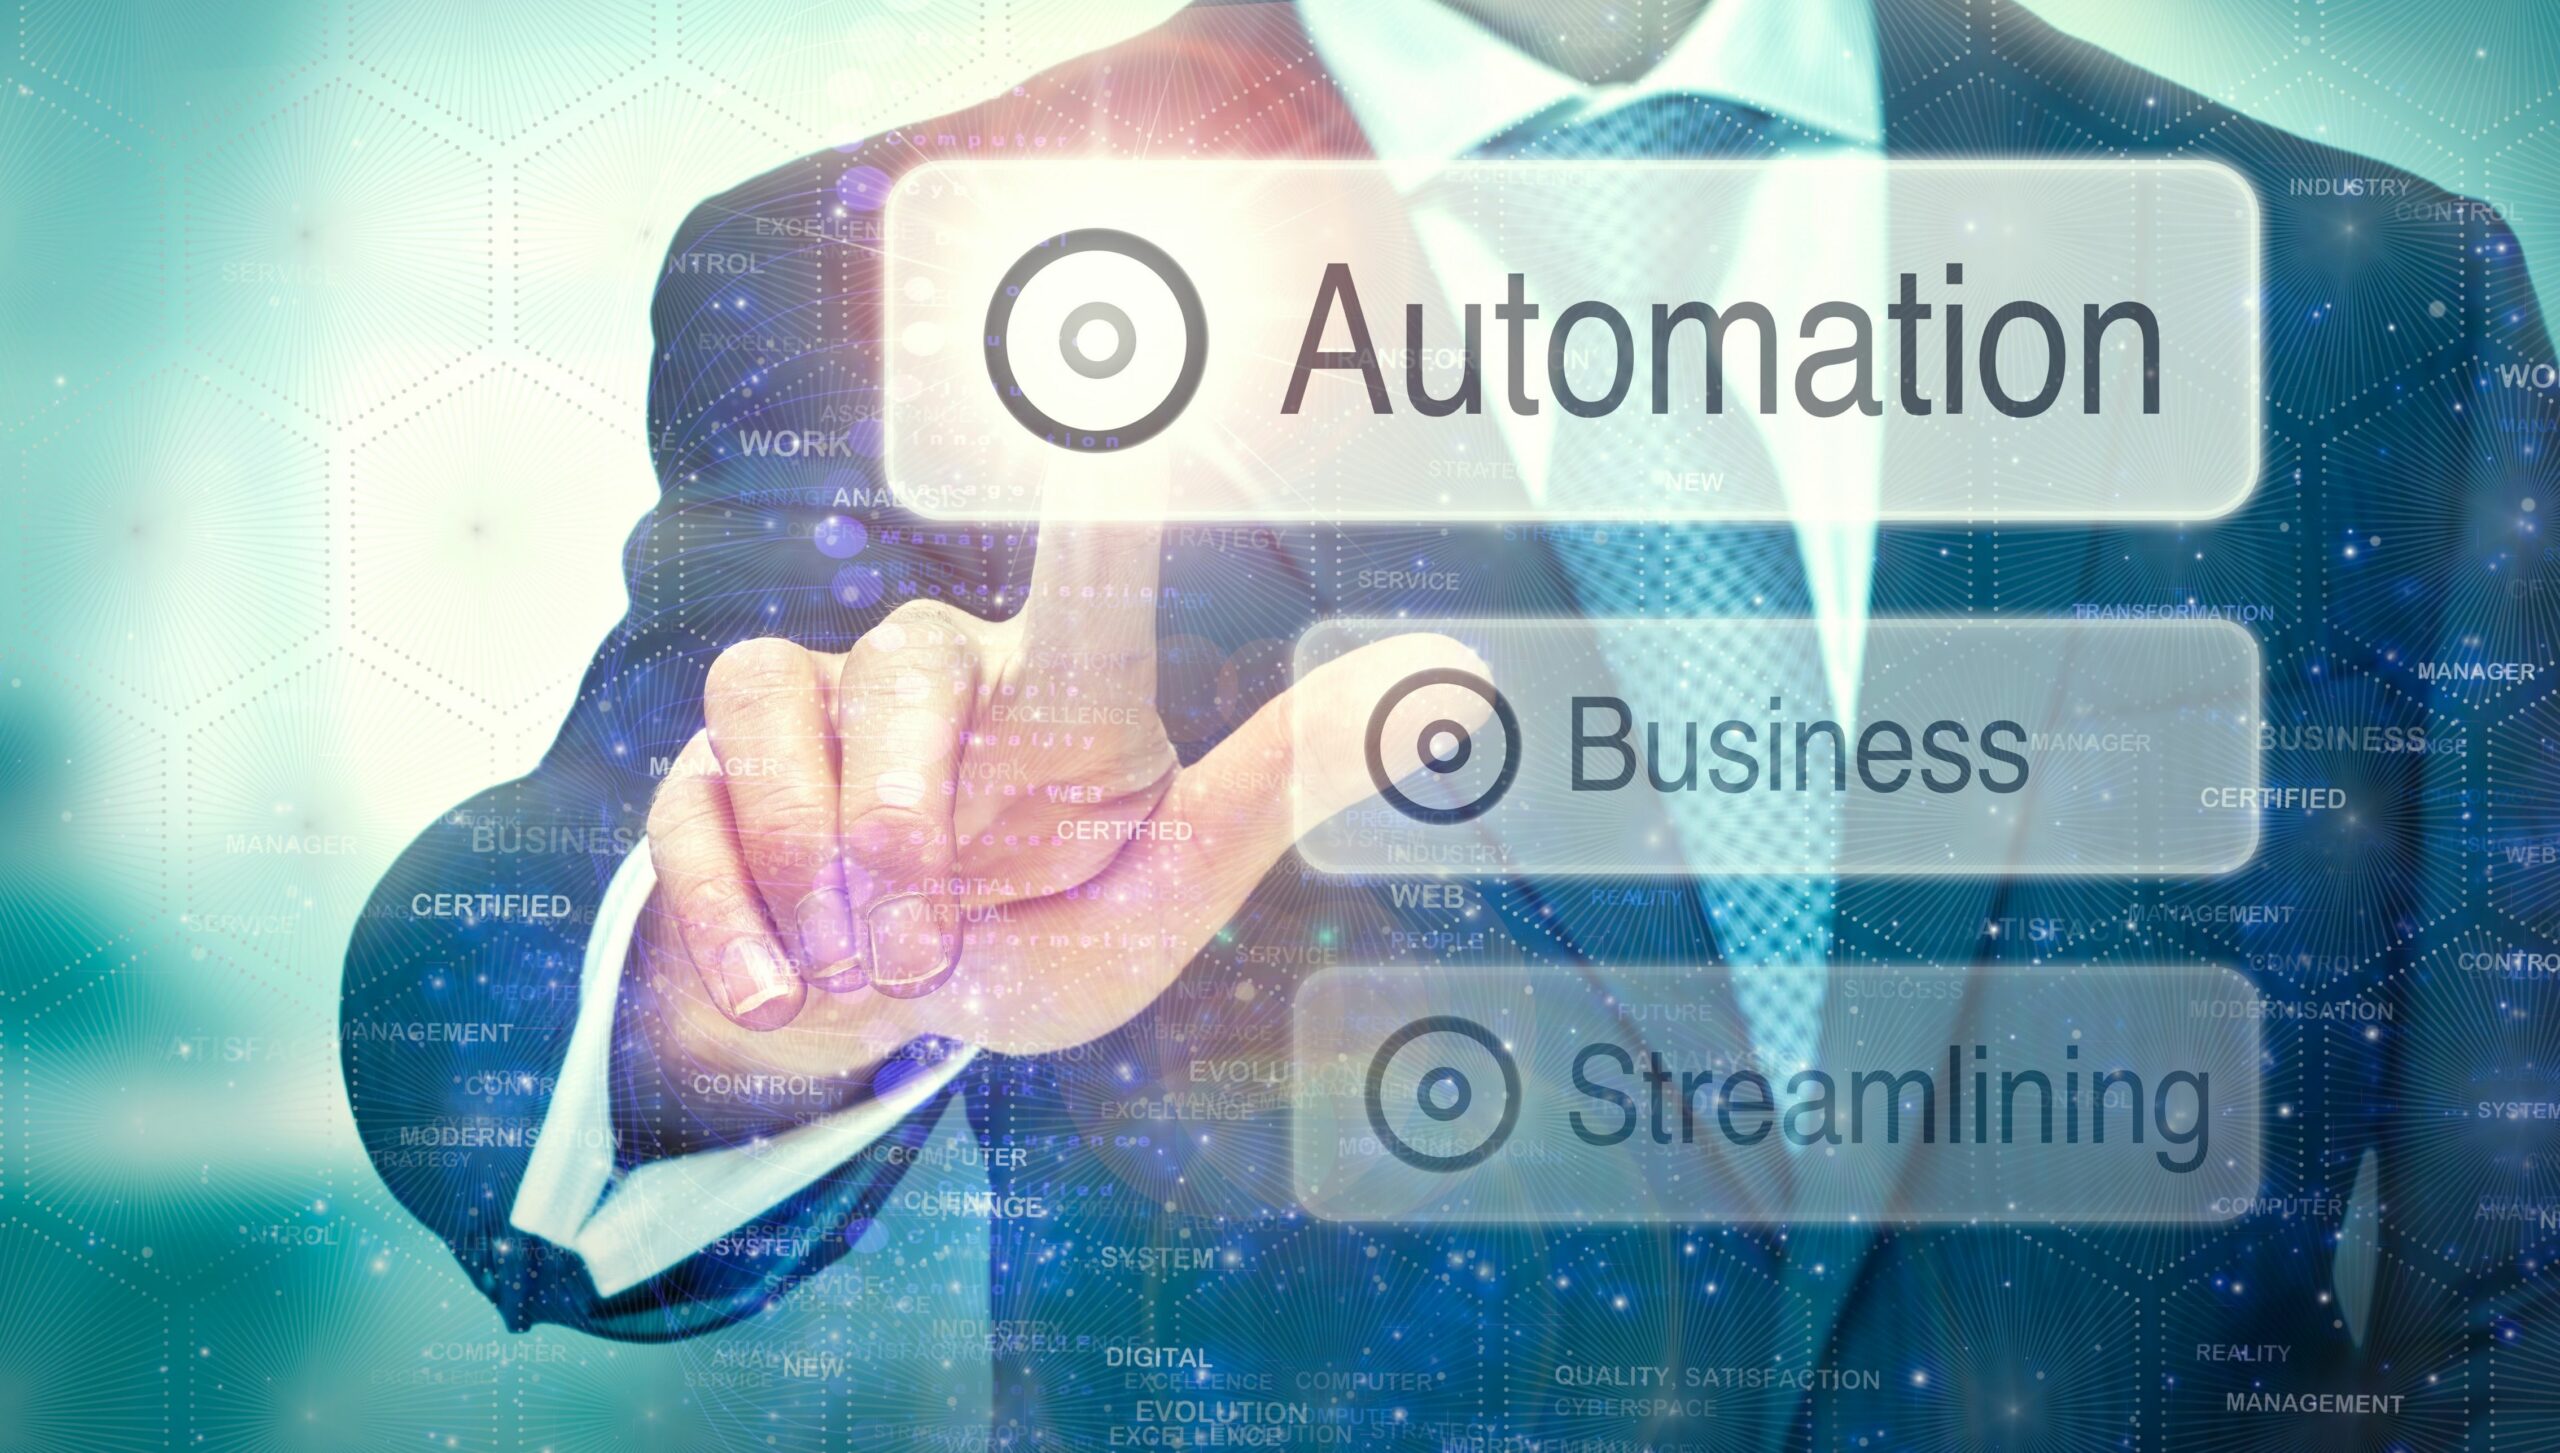 PR/PO Systems: The Benefits Of Digitisation And Automation